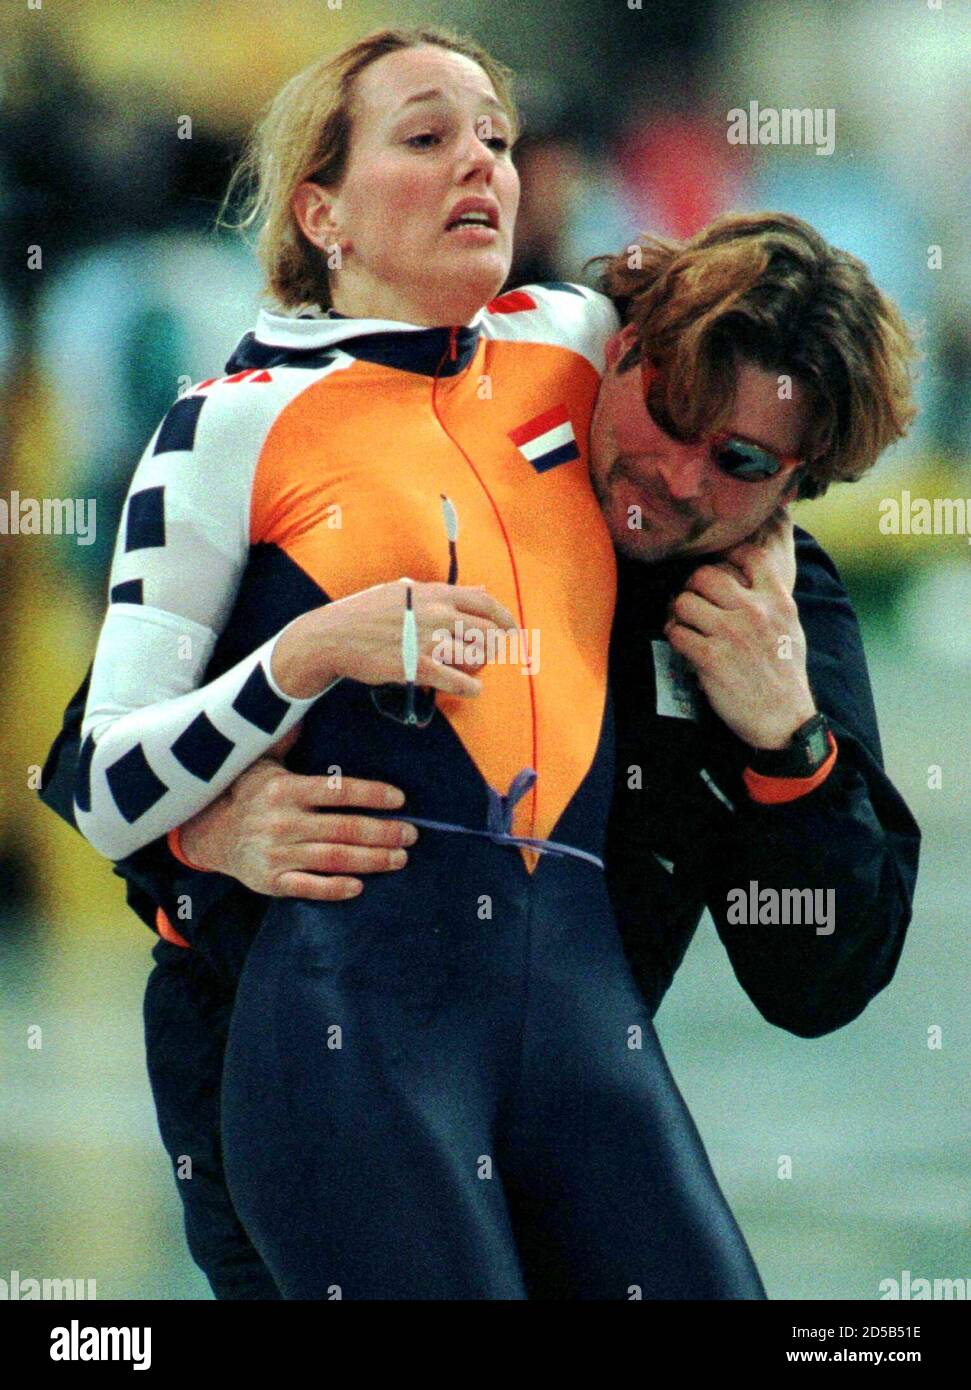 Blank udstødning fingeraftryk An exhausted Marianne Timmer of the Netherlands is helped by her coach  Peter Mueller after winning the Olympics women's 1,500 metres speed skating  race at the M-Wave stadium February 16. Timmer won